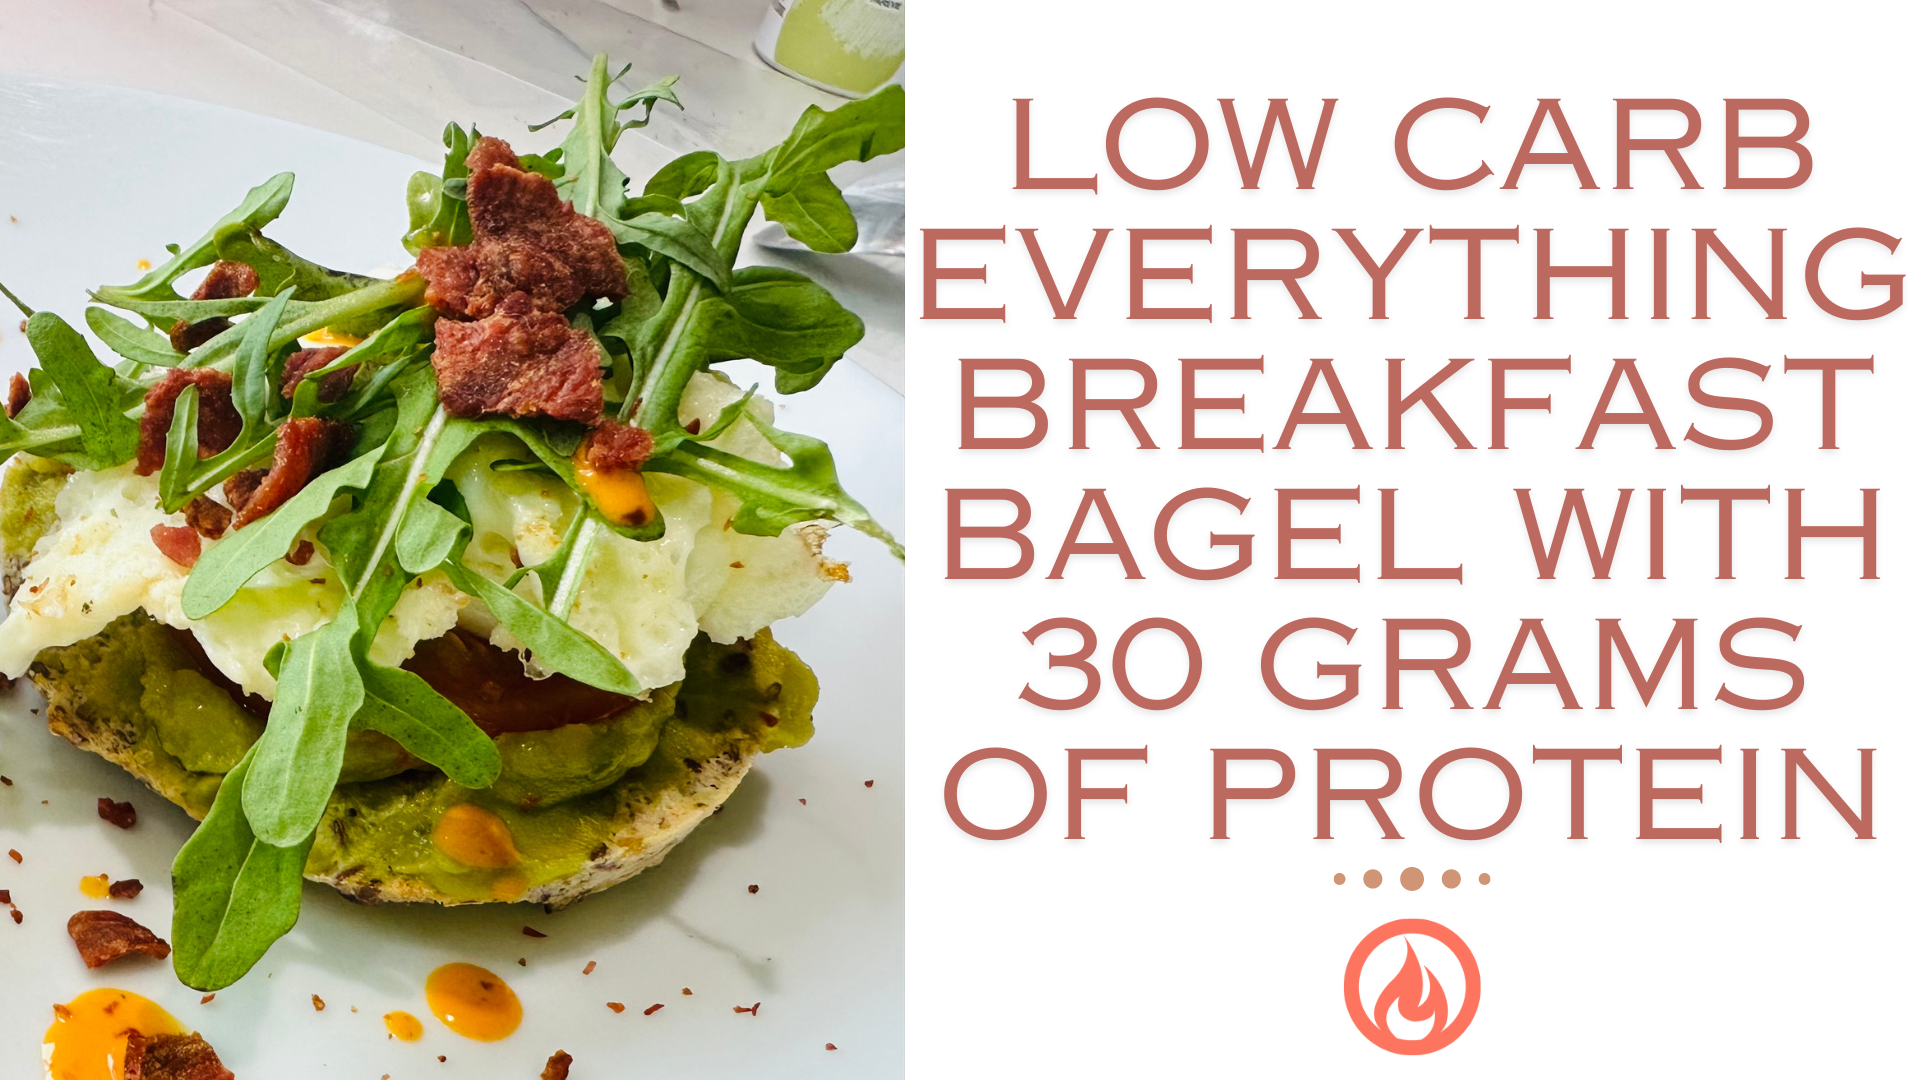 Gluten-Free & Dairy Free Low Carb Everything Breakfast Bagel with 30 grams of protein!